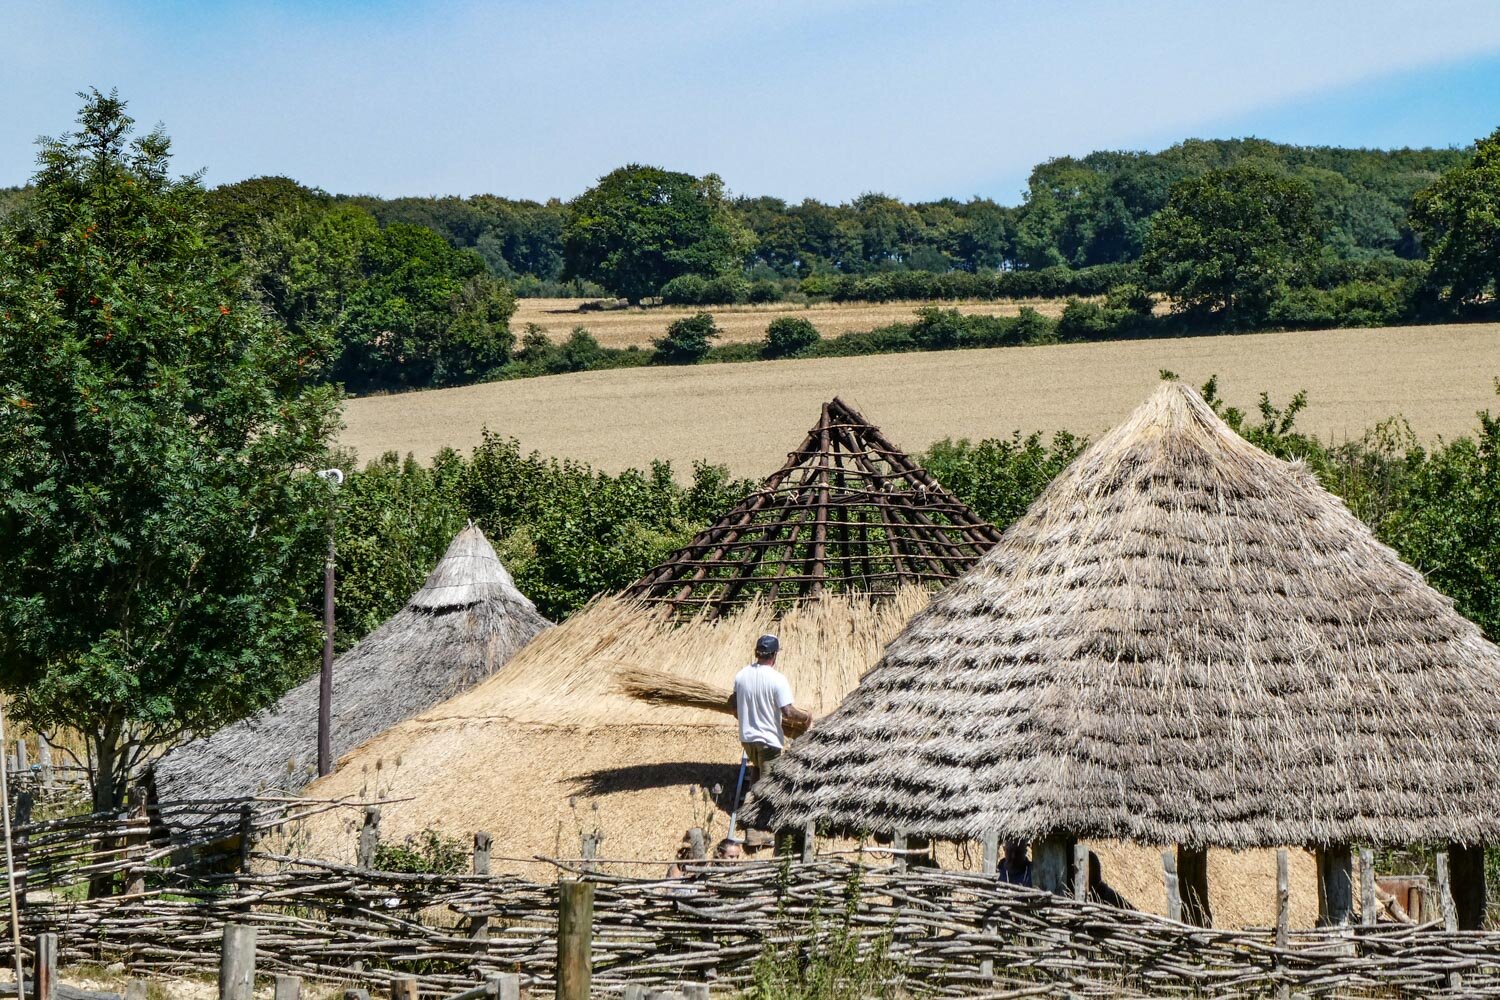 Thatching in the Iron Age enclosure